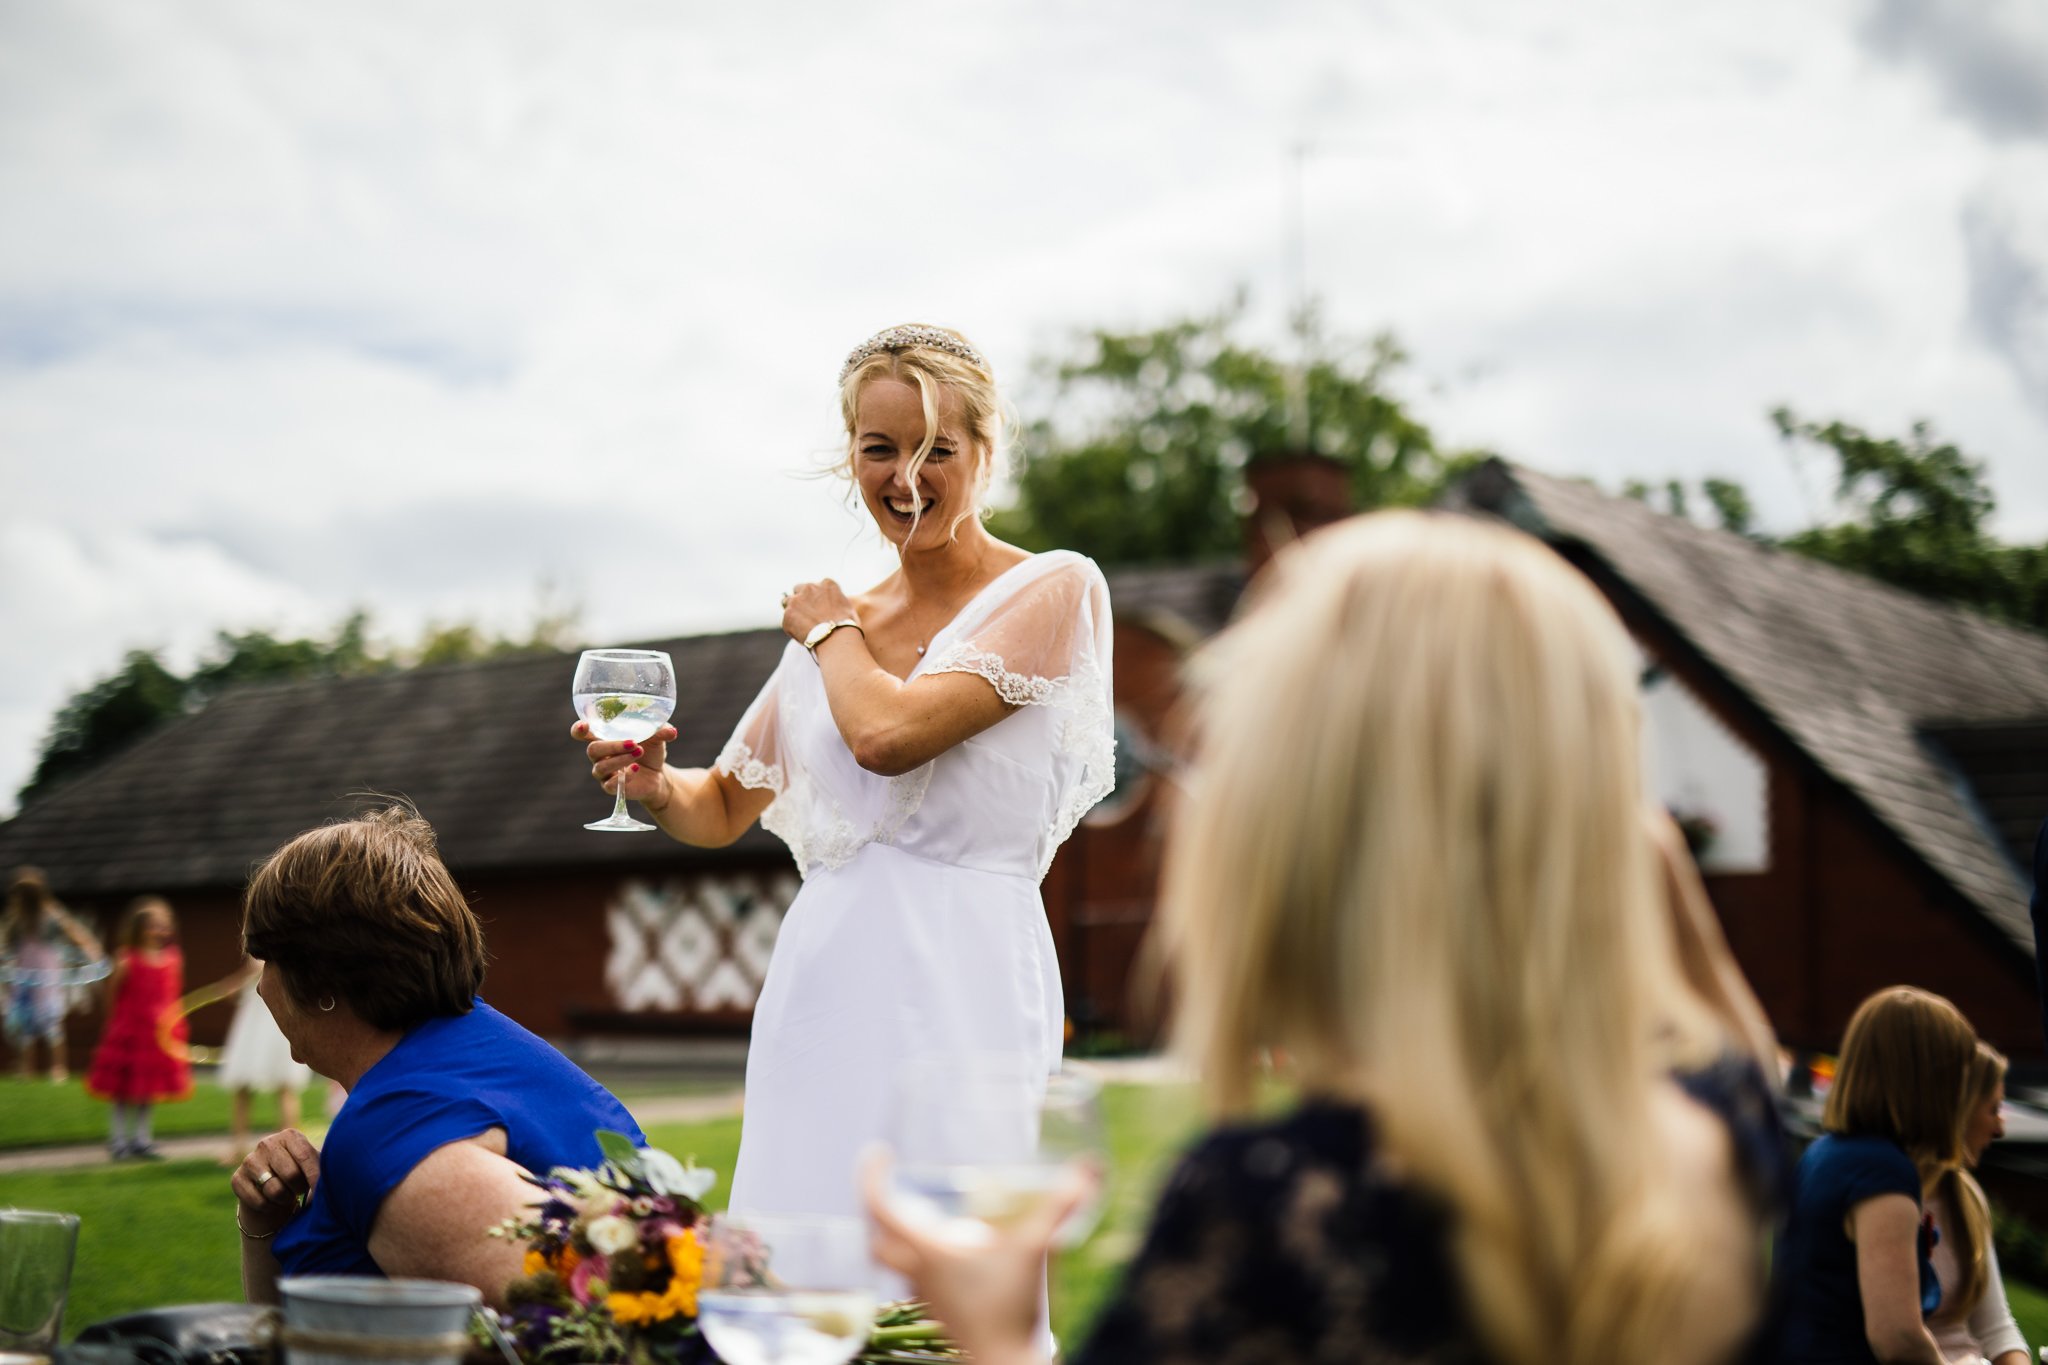  Bride smiling with a drink in hand at The Stables in Bury 